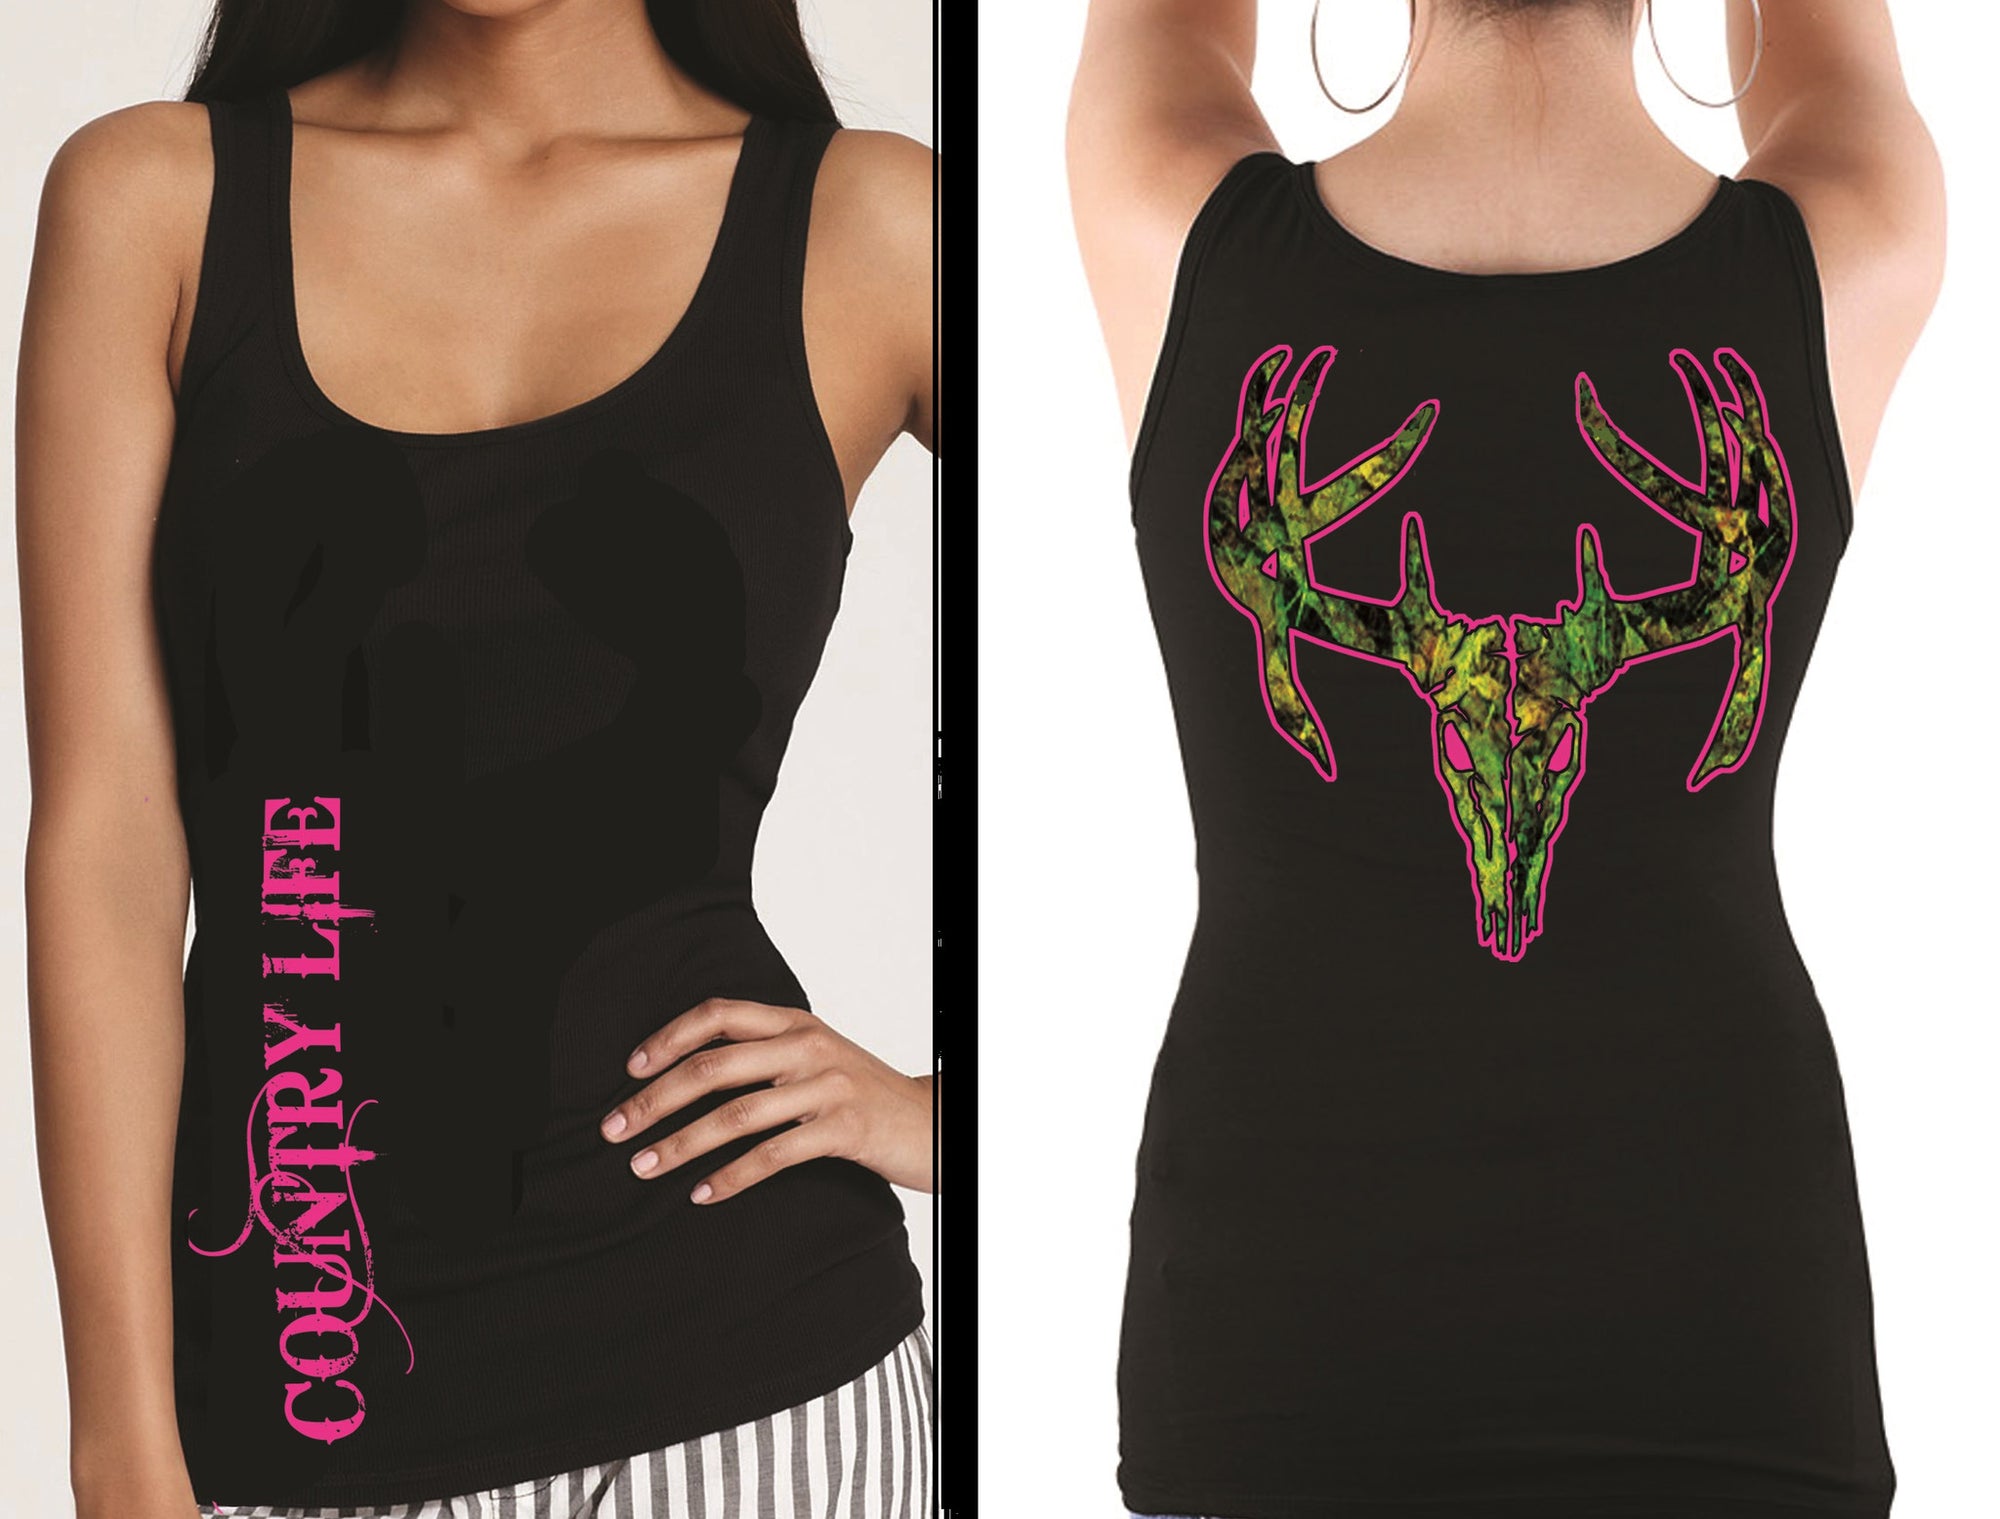 Country Life Outfitters Black & Pink Camo Realtree Deer Skull Head Hunt Vintage Bright Fitted Tank Top Shirt - SimplyCuteTees